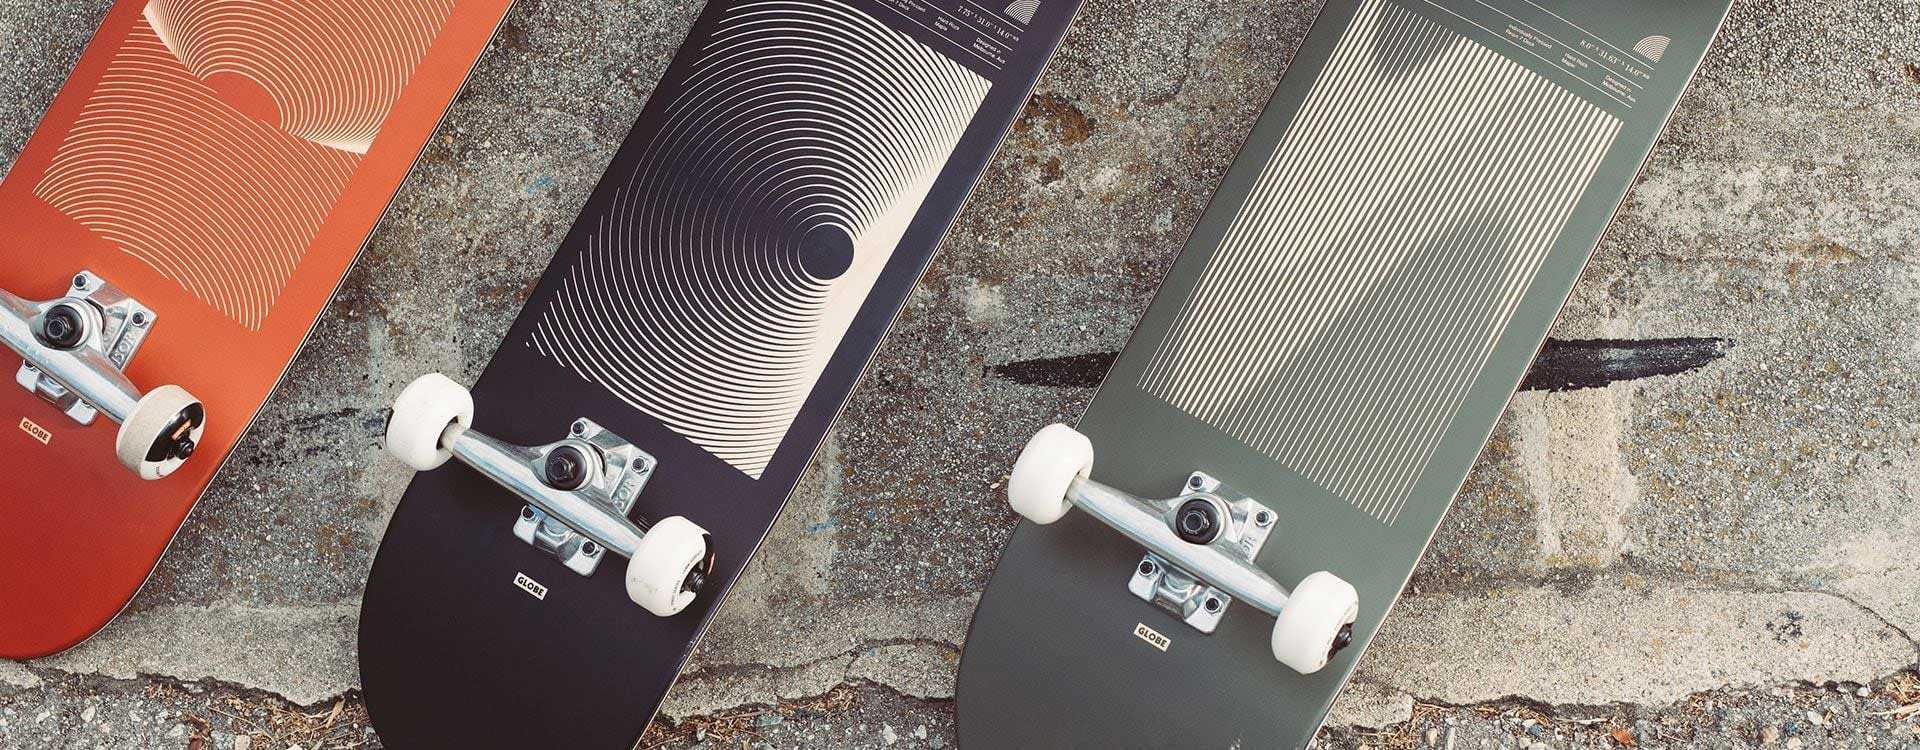 Review: How good are Globe skateboards?